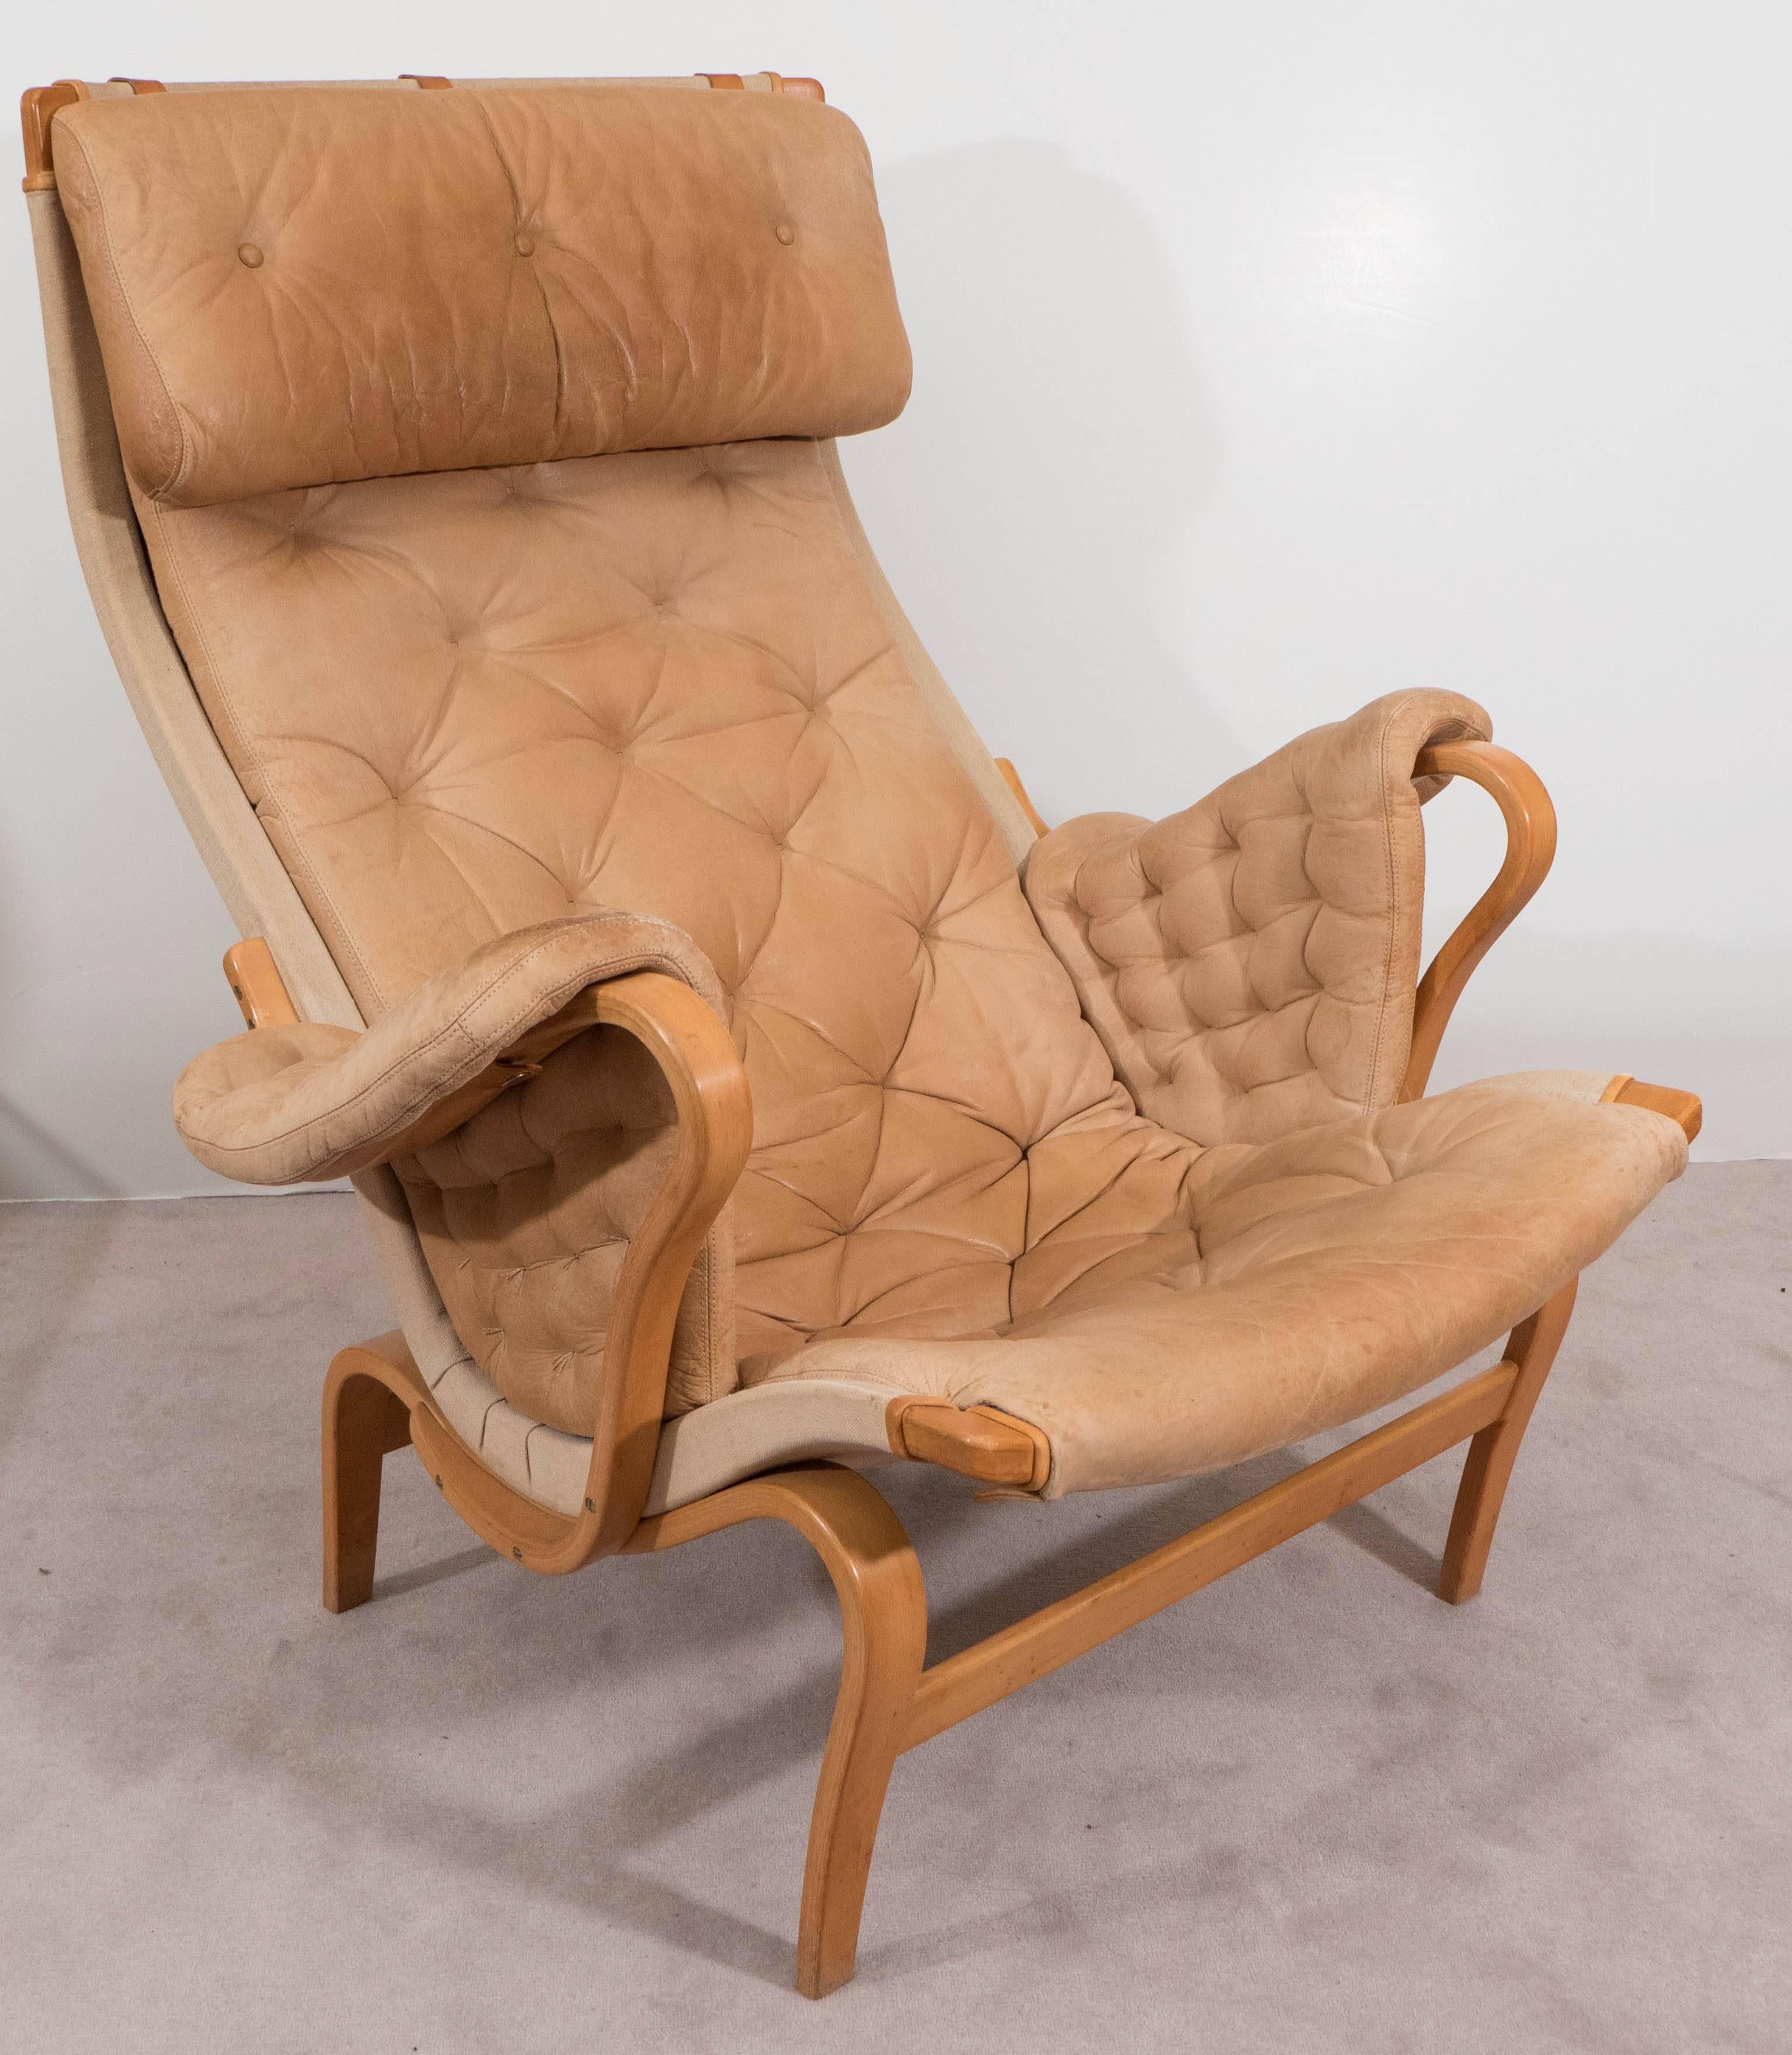 This Bruno Mathsson 'Pernilla' series lounge chair, produced by DUX circa 1970s, comes with cushioned seats and headrests in tufted tan leather, against linen and bentwood frames in beech. Markings include [Bruno Mathsson by DUX] stamped to the wood